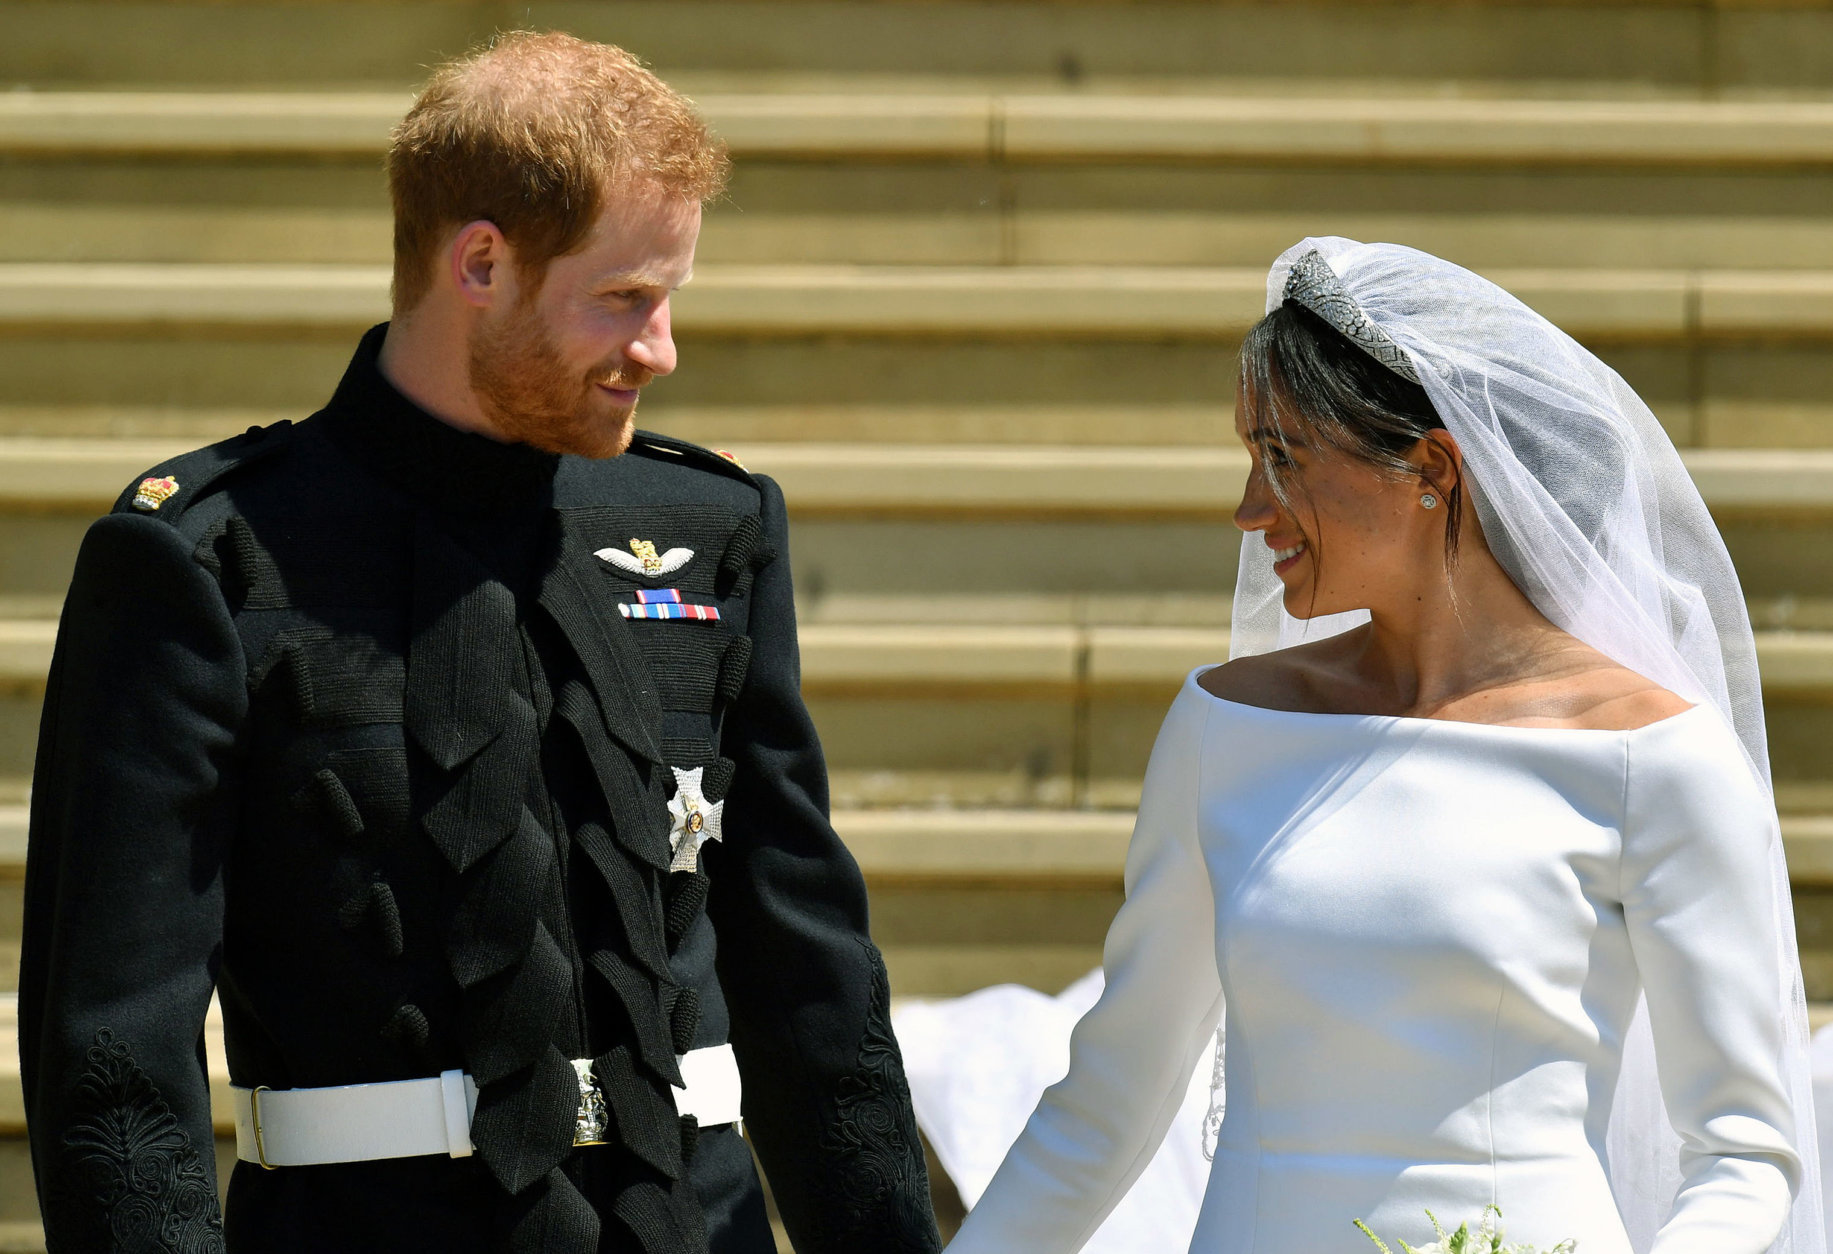 Prince Harry and Meghan Markle walk down the steps after their wedding at St. George's Chapel in Windsor Castle in Windsor, near London, England, Saturday, May 19, 2018. (Ben Birchhall/pool photo via AP)